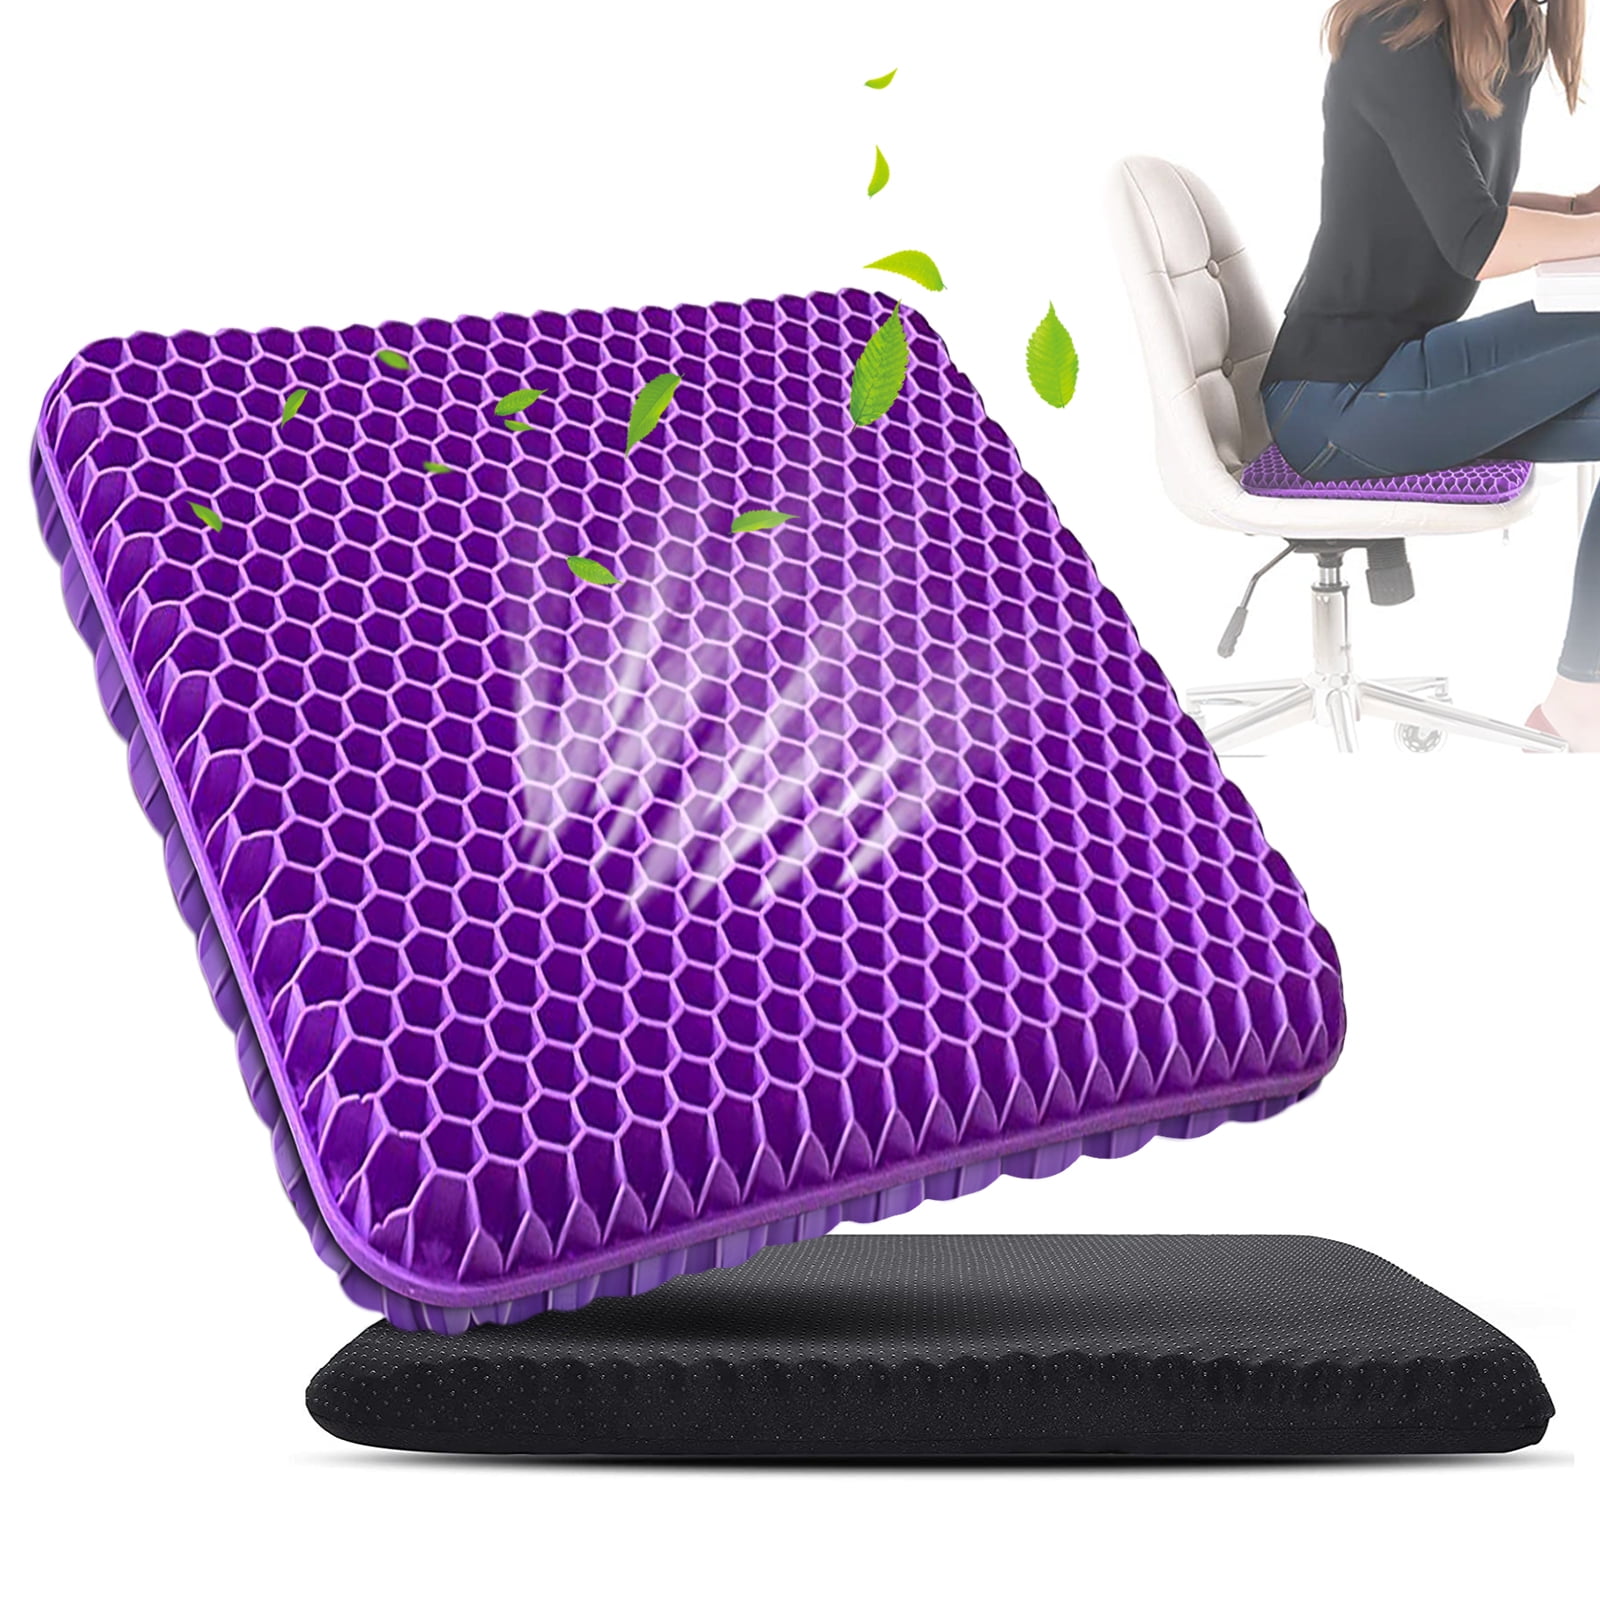 Gel Seat Cushion Egg Sitting Soft Pad for Spine Back Pain Relief Non-Slip  Cover